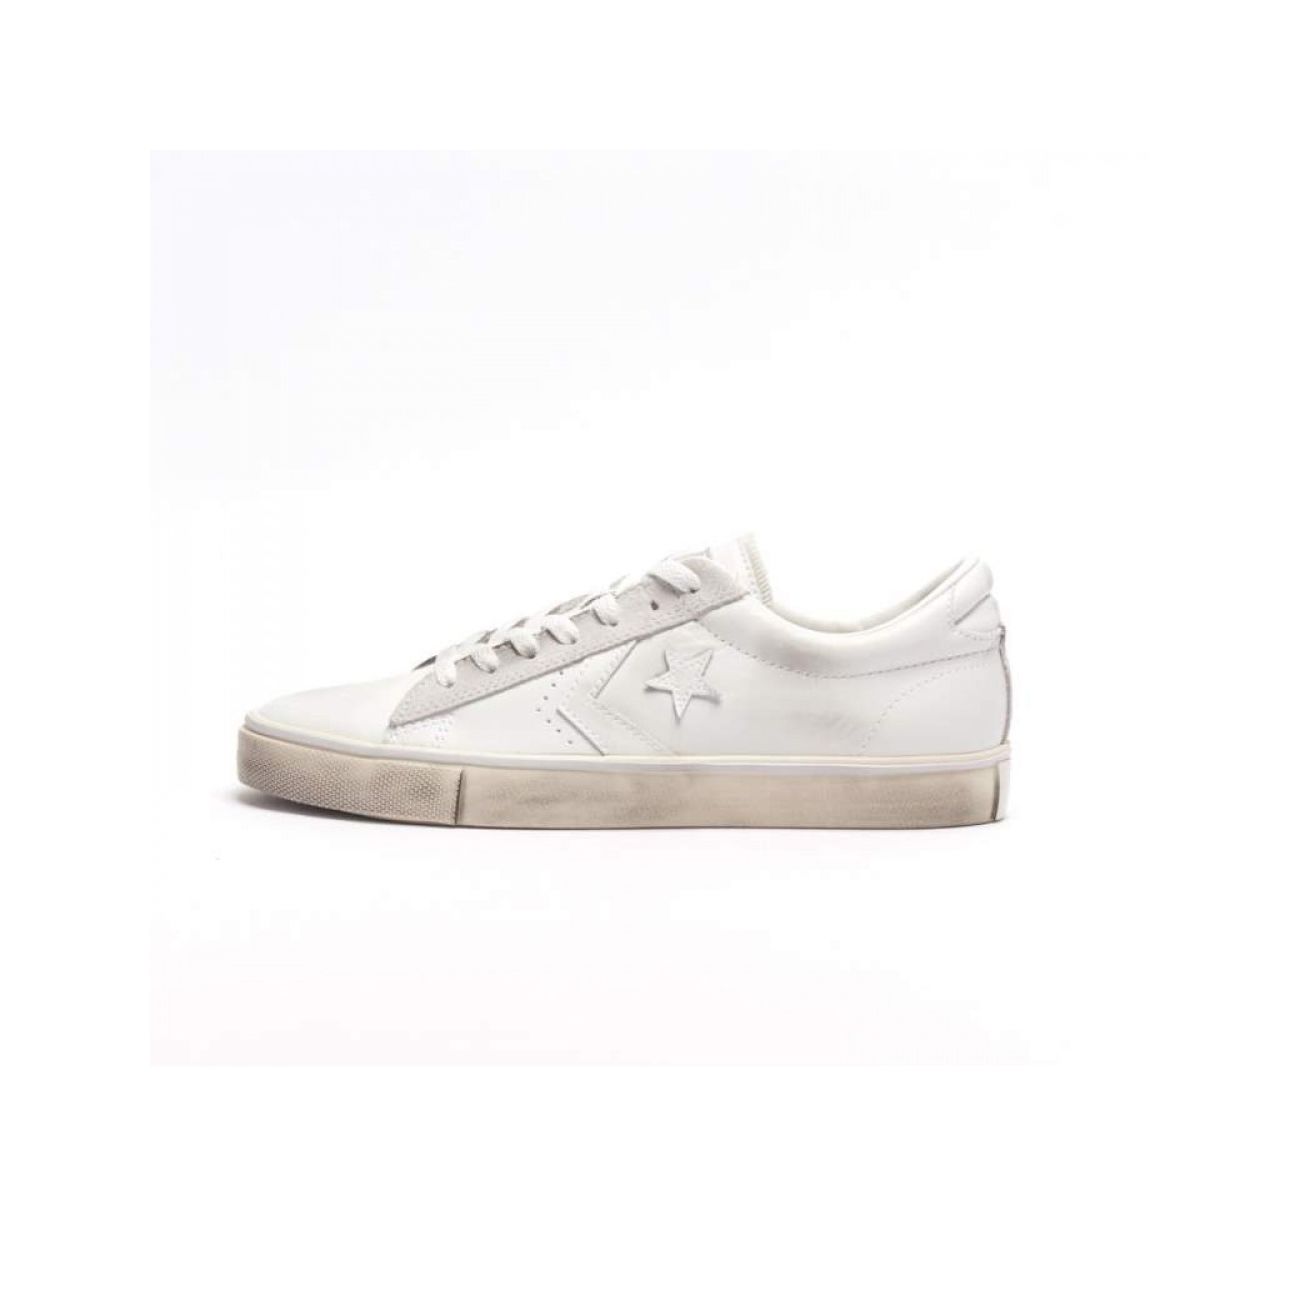 CONVERSE SNEAKER PRO LEATHER VULC OX LEATHER WHITE/WHITE/MOUSE ... افضل سكر لمرضى السكر